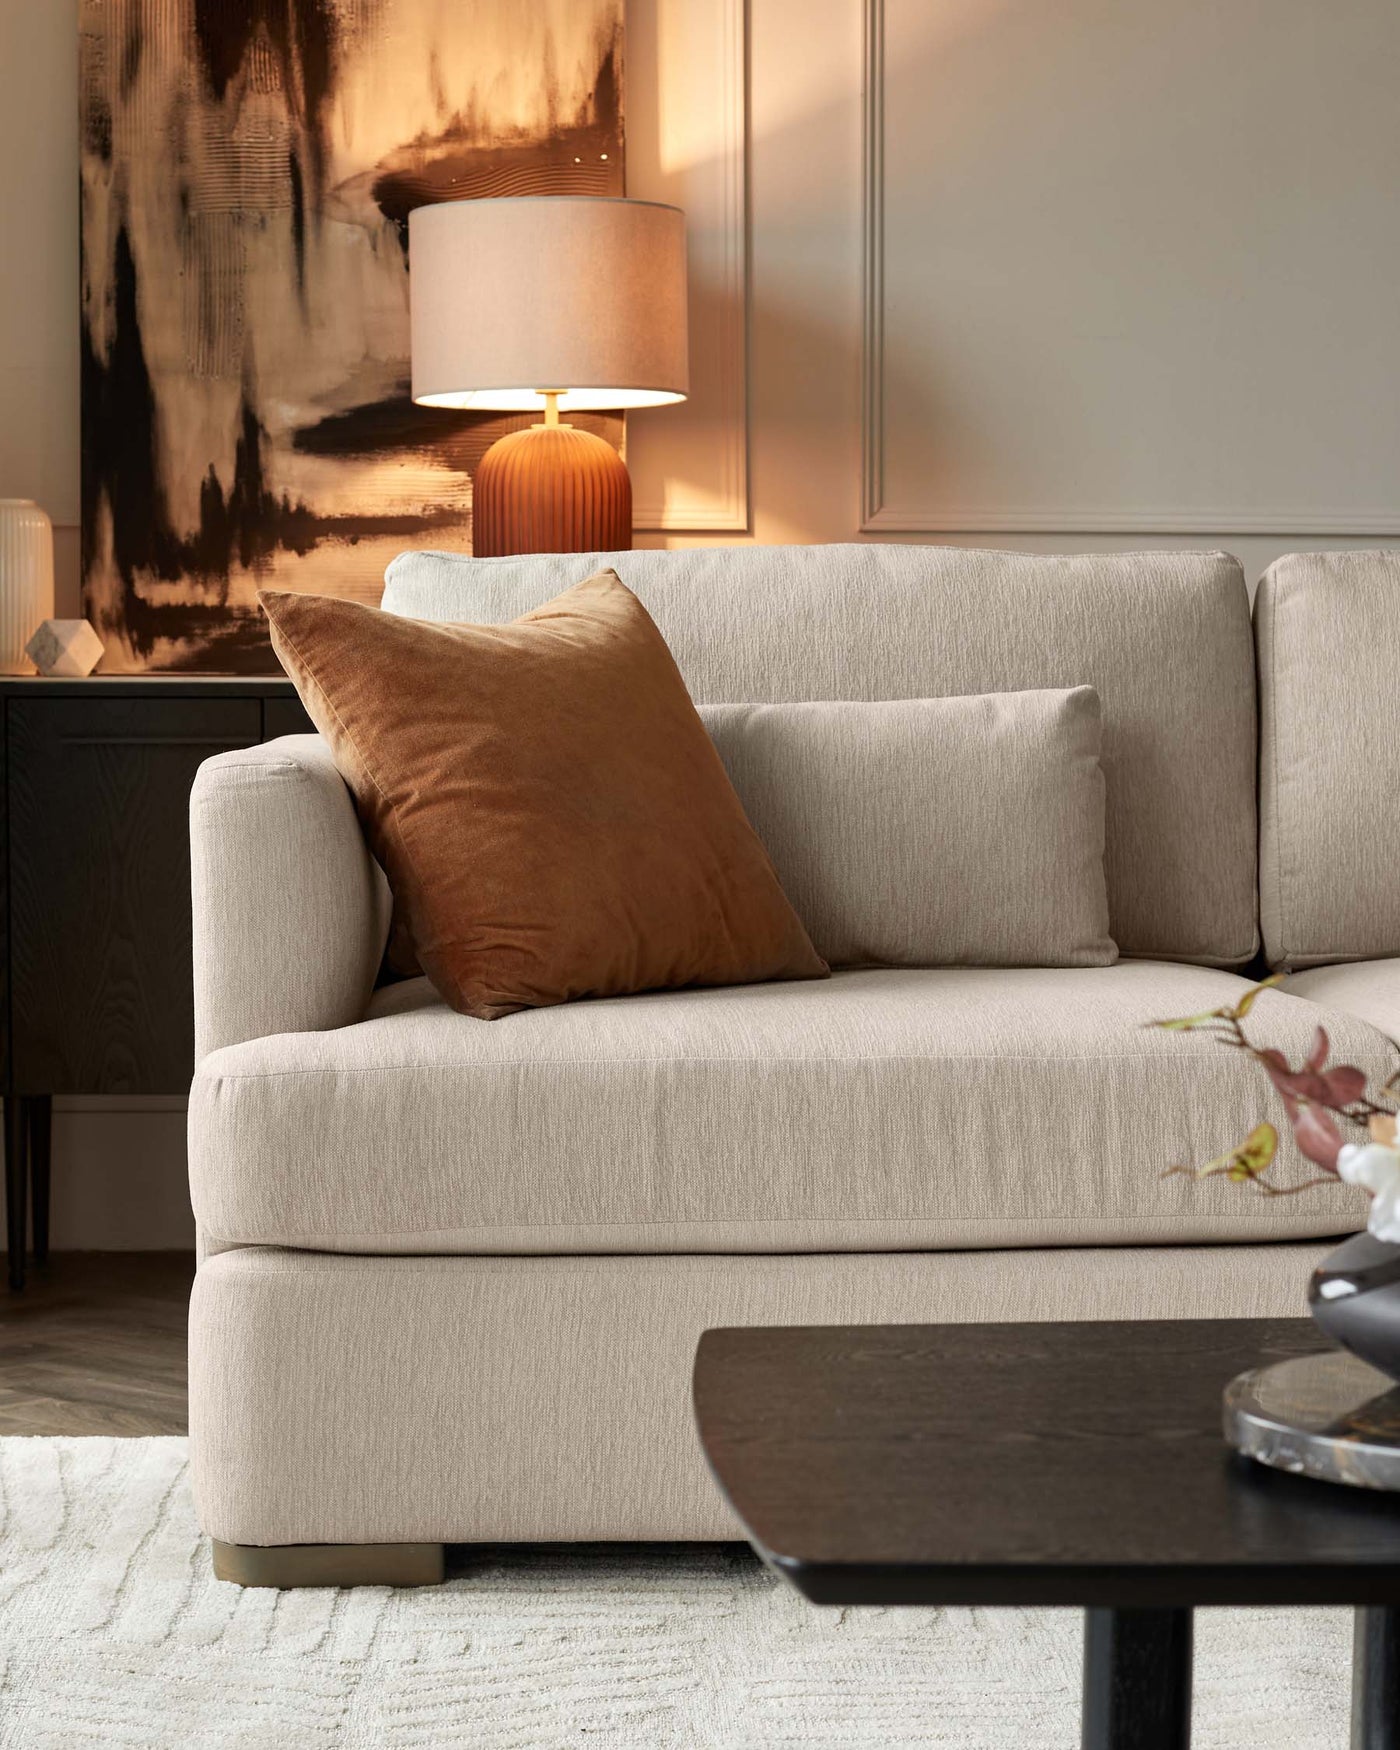 A contemporary light beige fabric sofa with clean lines and minimalistic design, featuring plush back cushions and a single seat cushion, complemented by a rich brown velvet throw pillow. A dark wooden coffee table with an irregular organic shape sits in the foreground, while a stylish table lamp with a ceramic base and neutral lampshade creates a warm ambiance on a sideboard in the background. The scene is tied together with a textured off-white area rug underfoot, creating a cosy, modern living space.